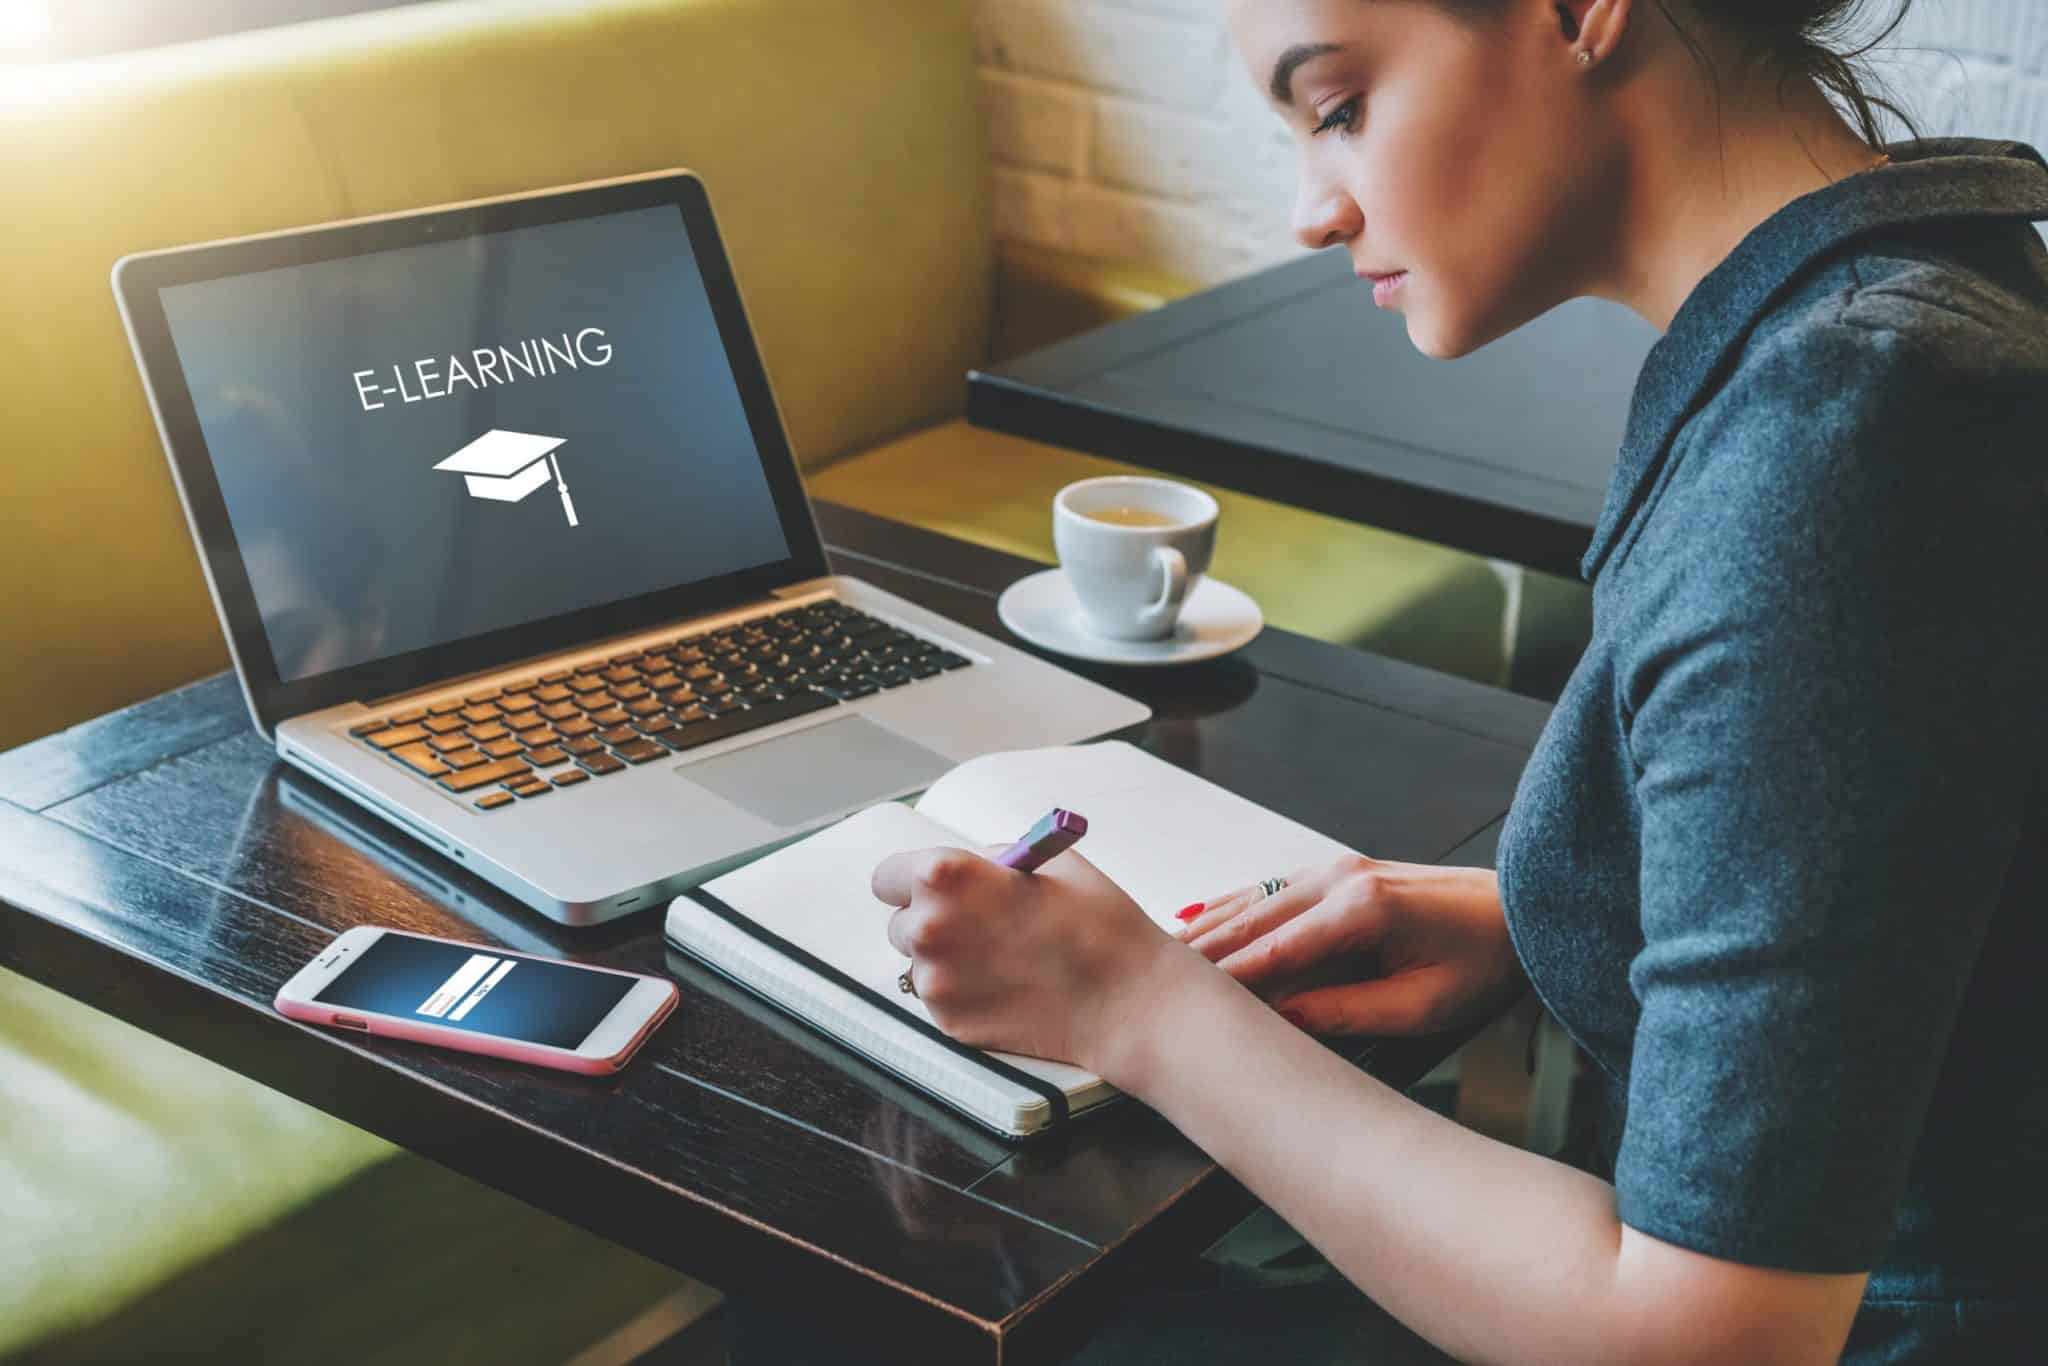 10 Effective Ways to Market Your Online Course